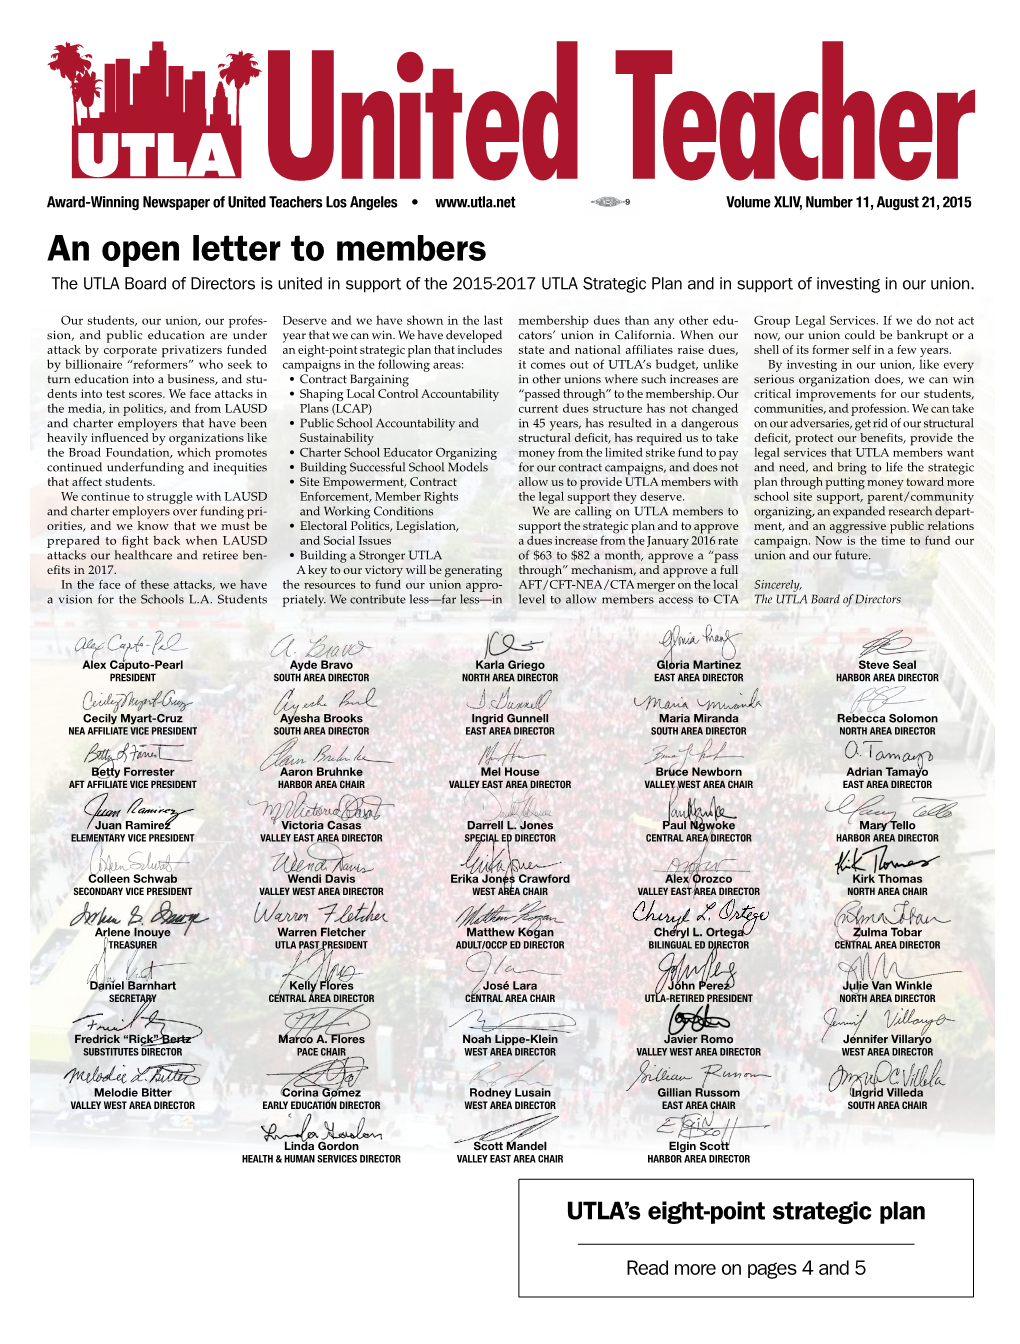 An Open Letter to Members the UTLA Board of Directors Is United in Support of the 2015-2017 UTLA Strategic Plan and in Support of Investing in Our Union